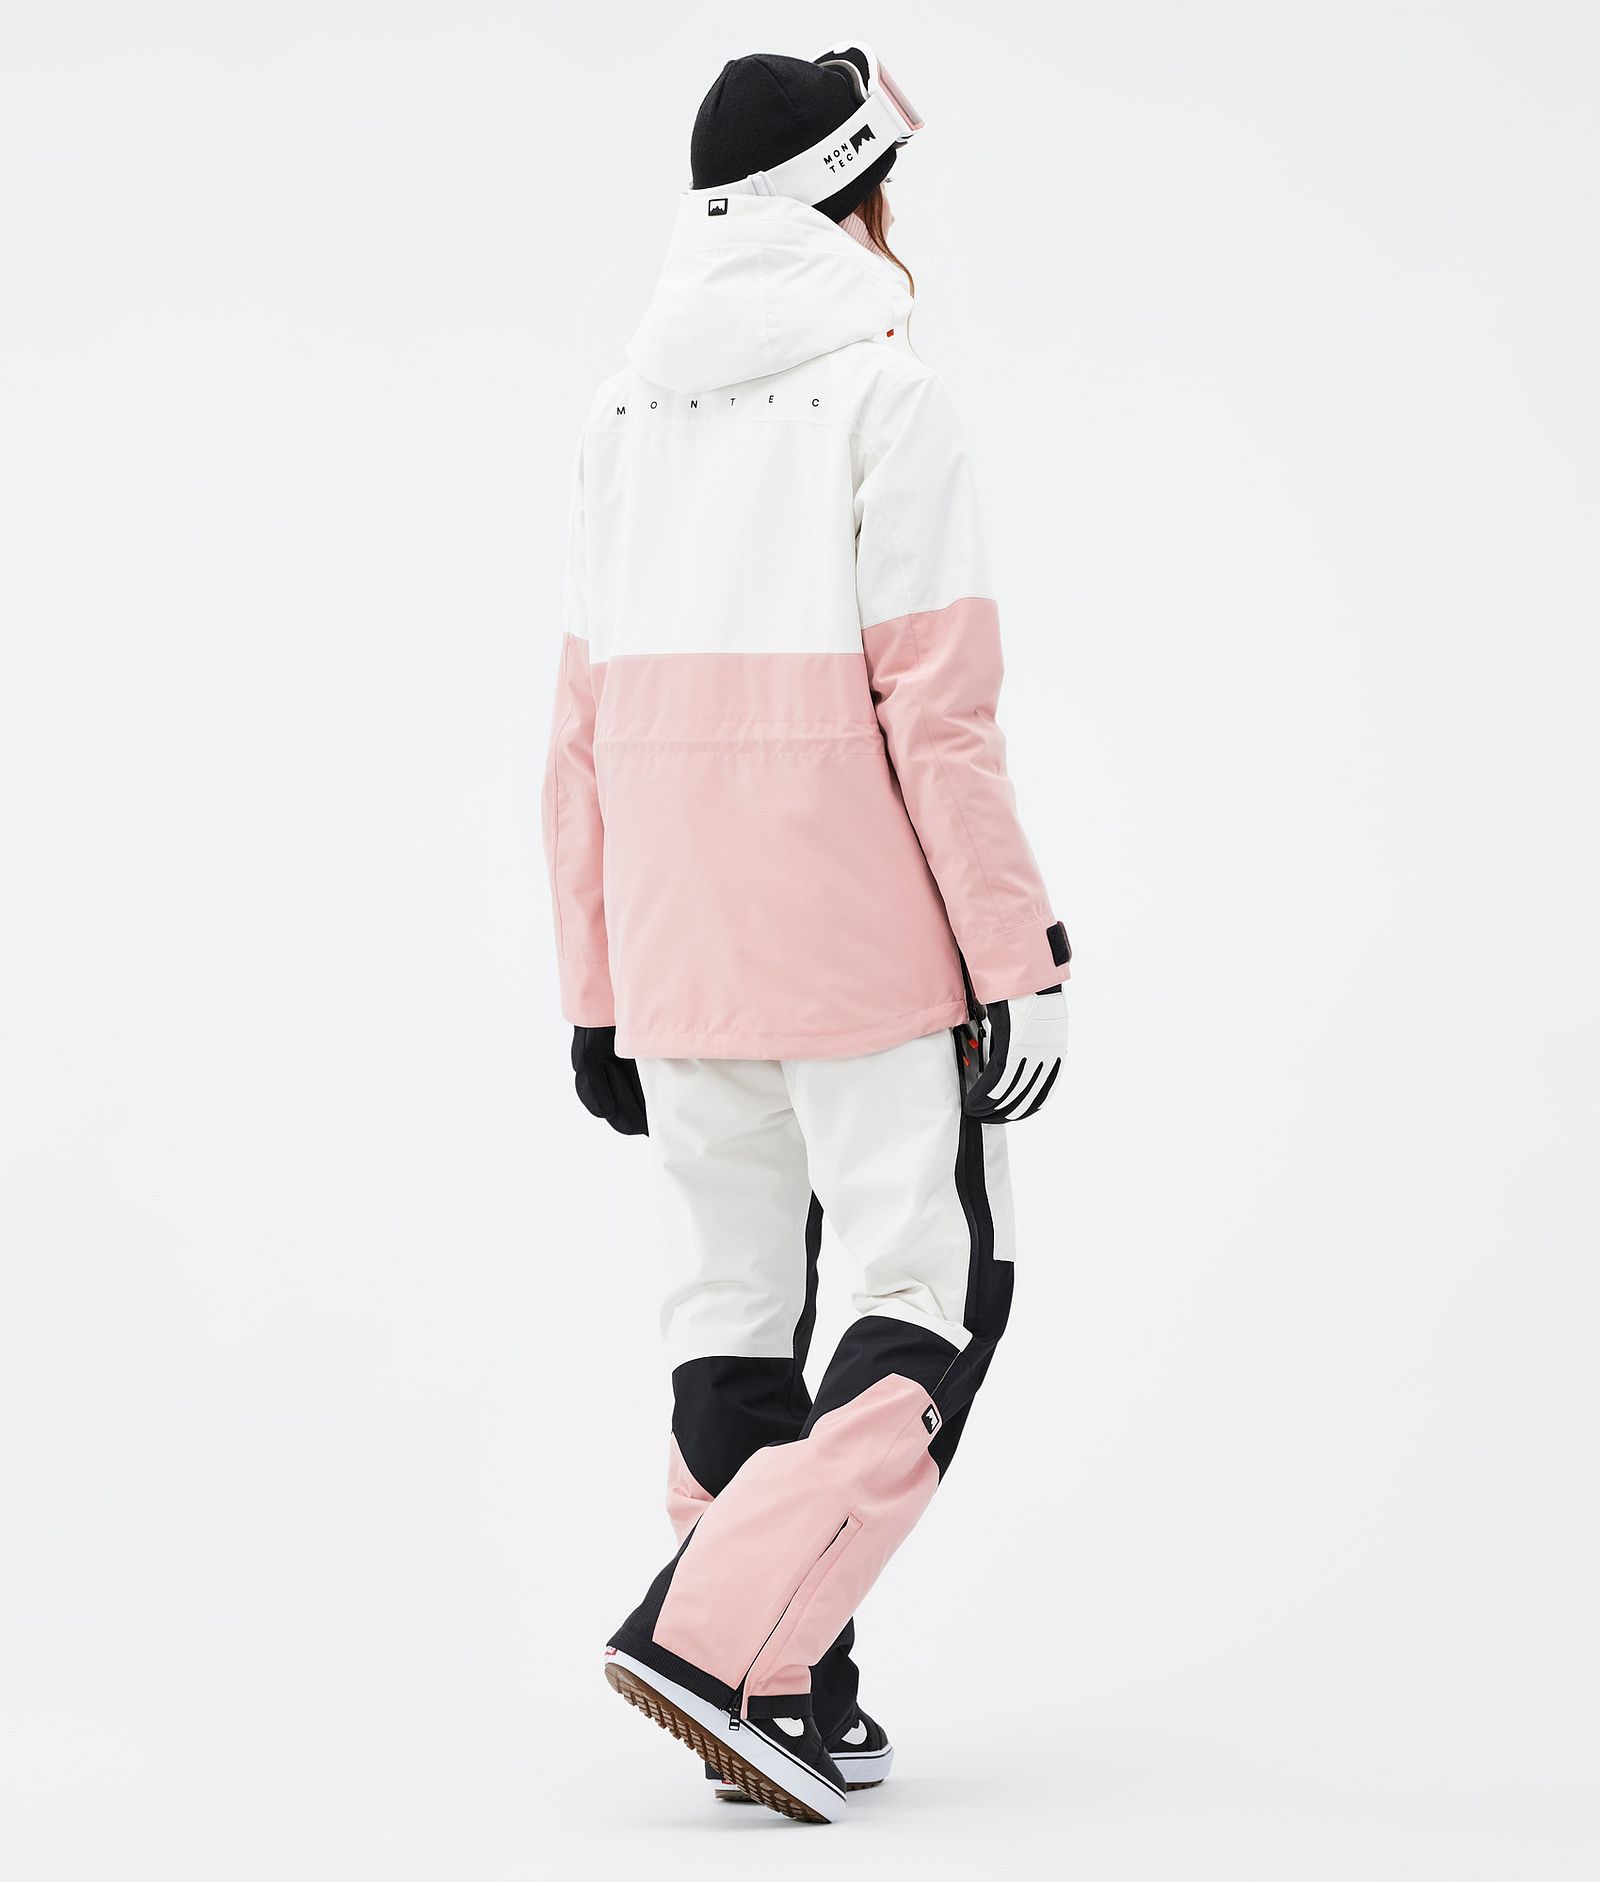 Dune W Snowboardoutfit Dame Old White/Black/Soft Pink